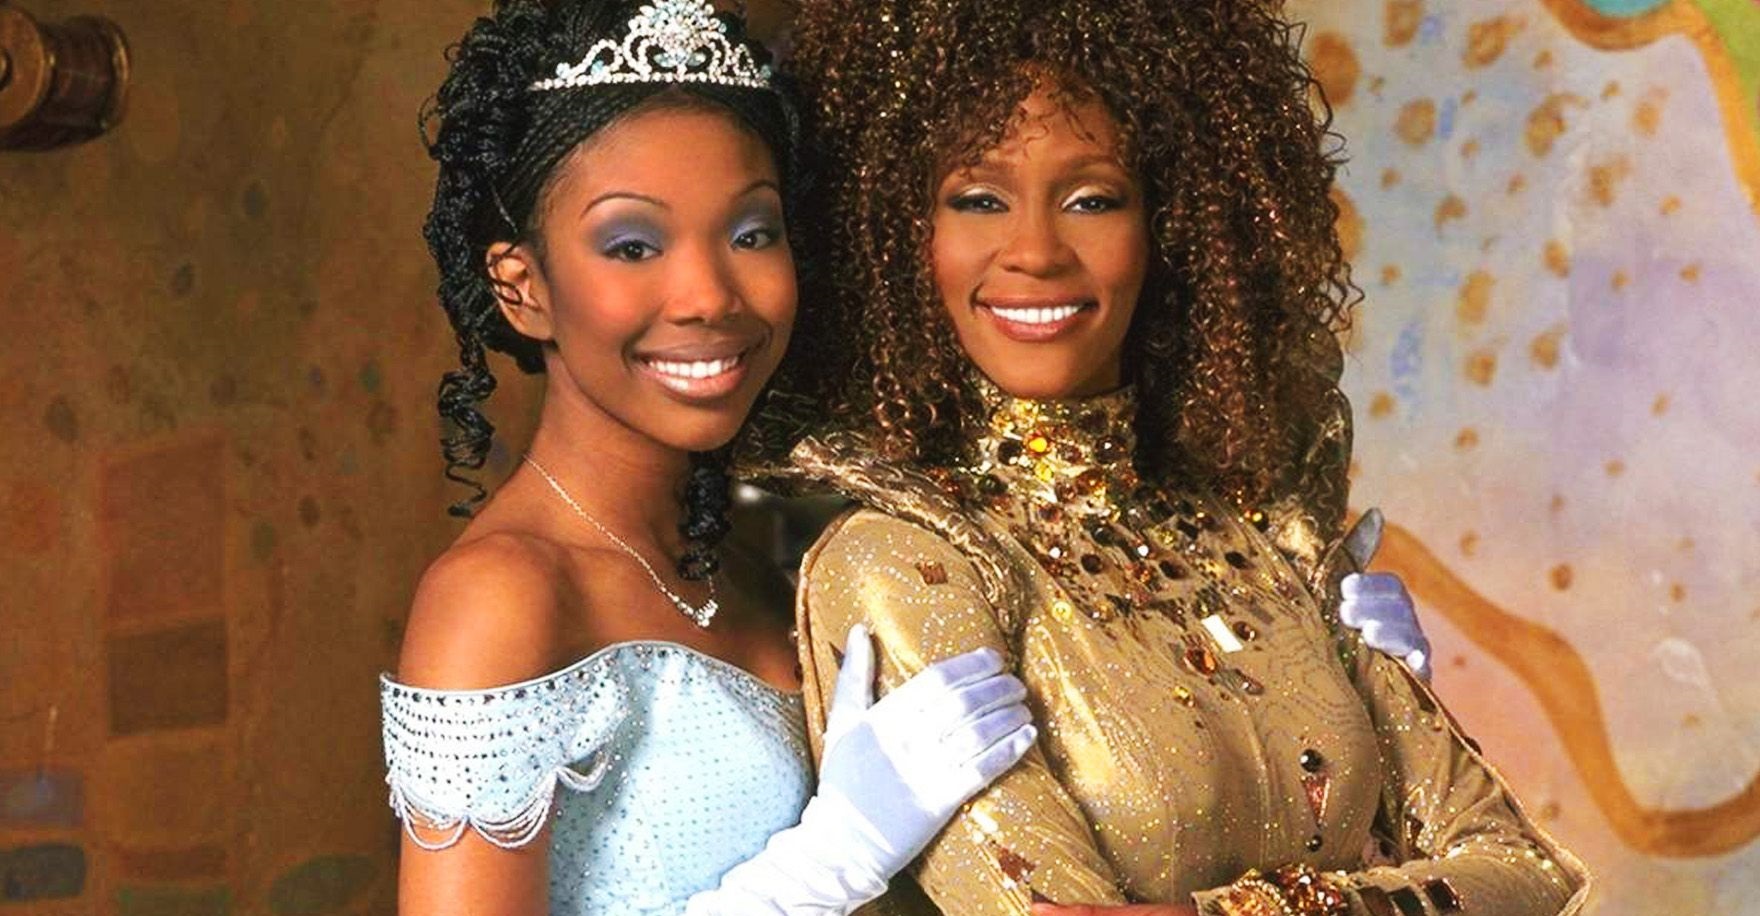 Whitney Houston and Brandy’s Iconic Cinderella Movie Is Finally Coming To Disney+